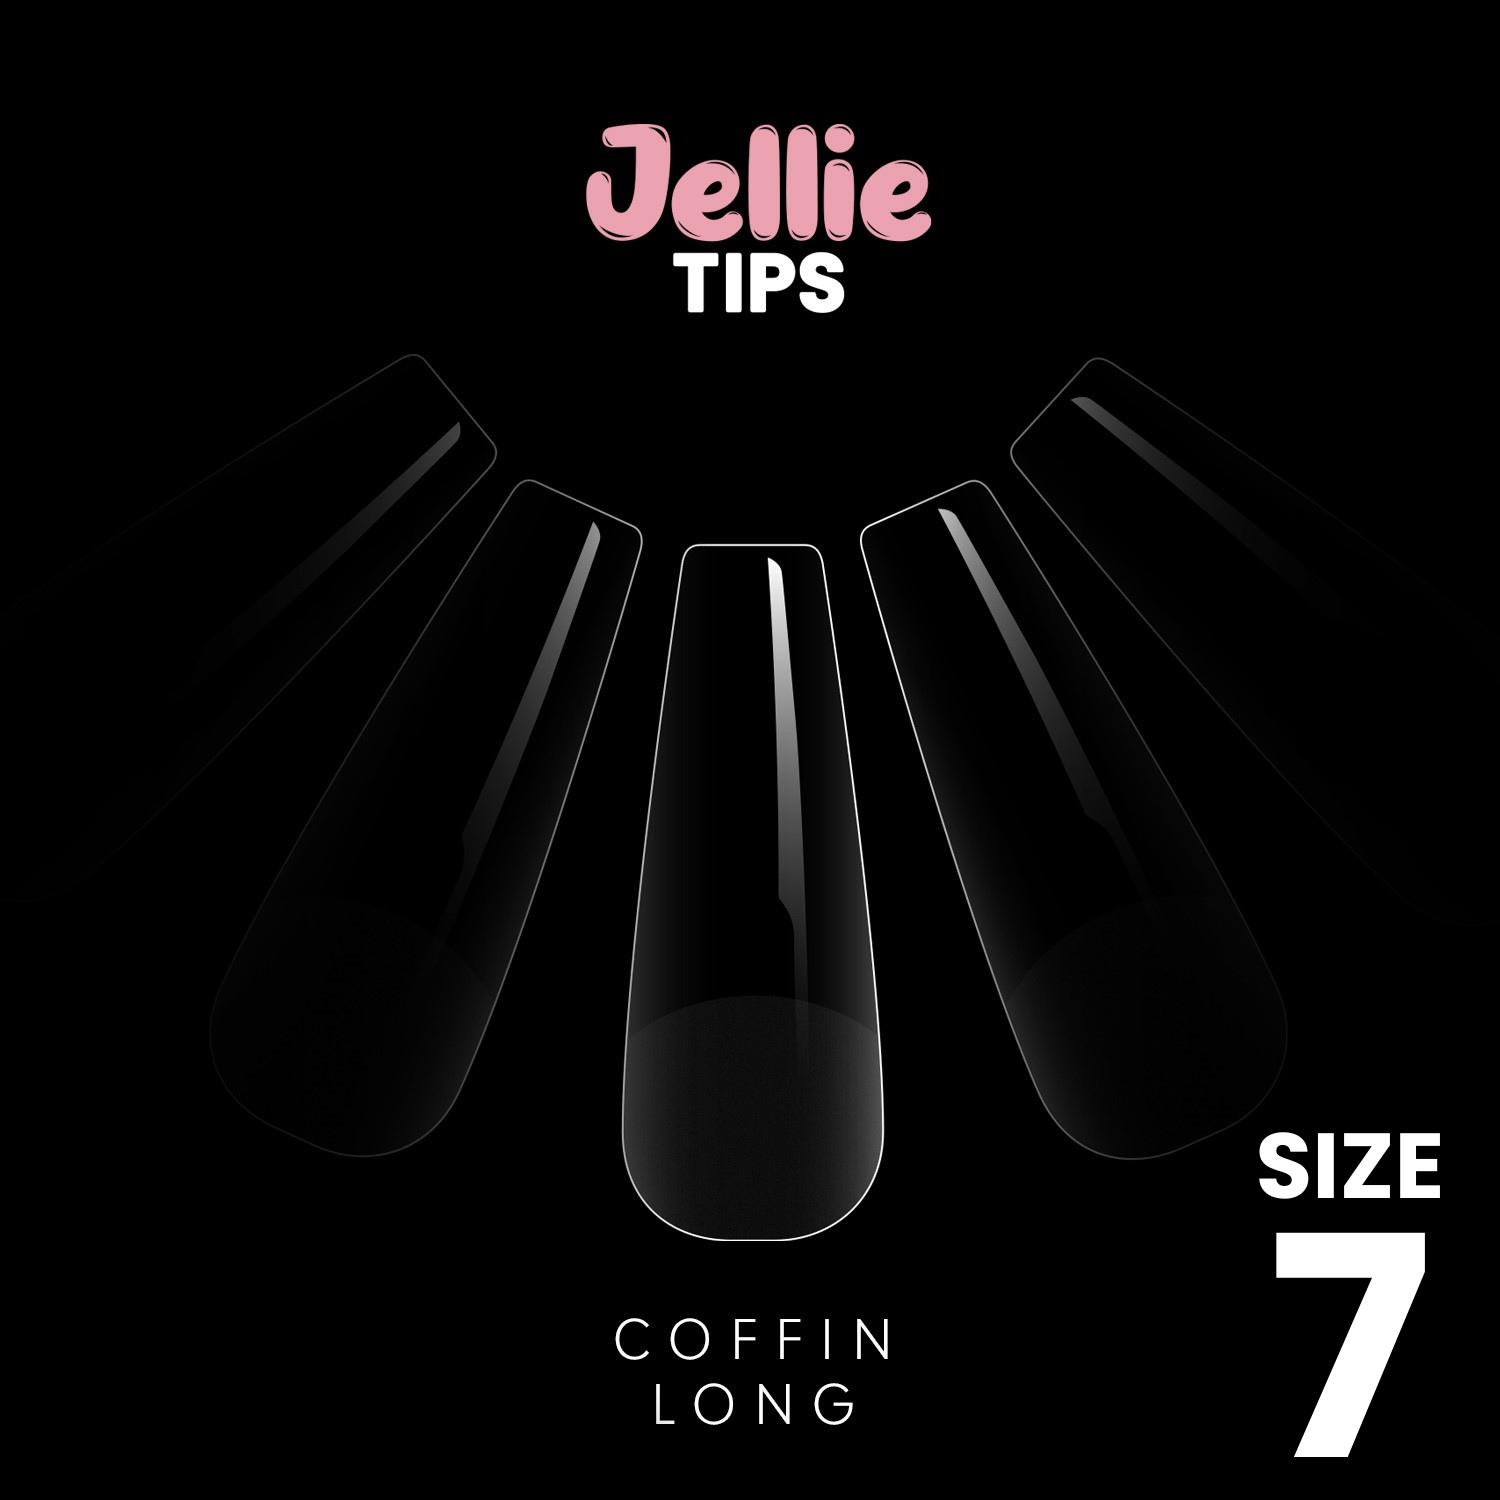 Halo Jellie Nail Tips Coffin Long, Sizes 7, 50 One Size